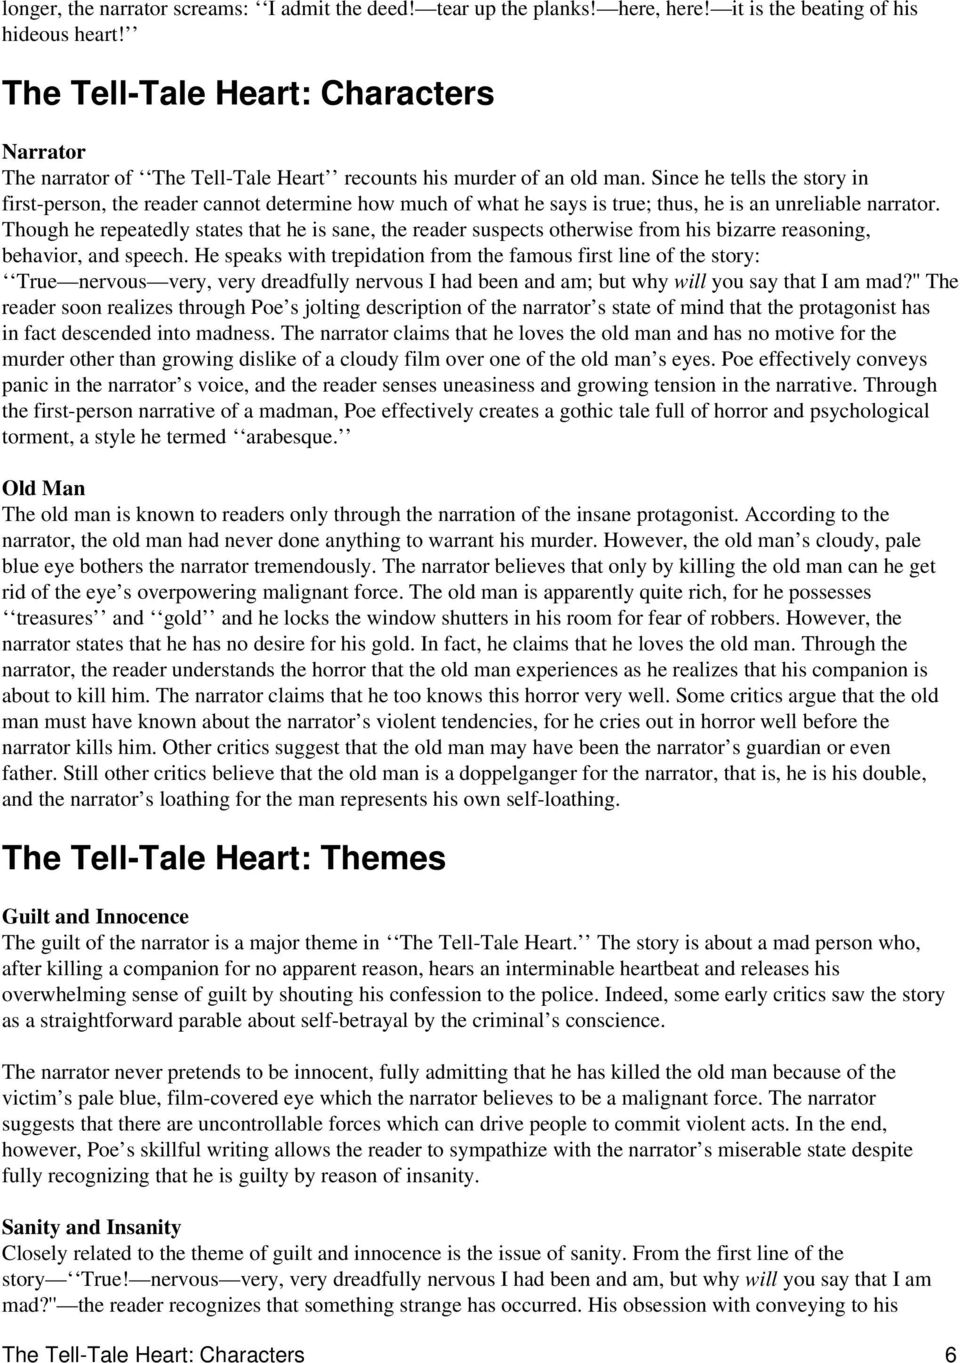 the tell tale heart criticism